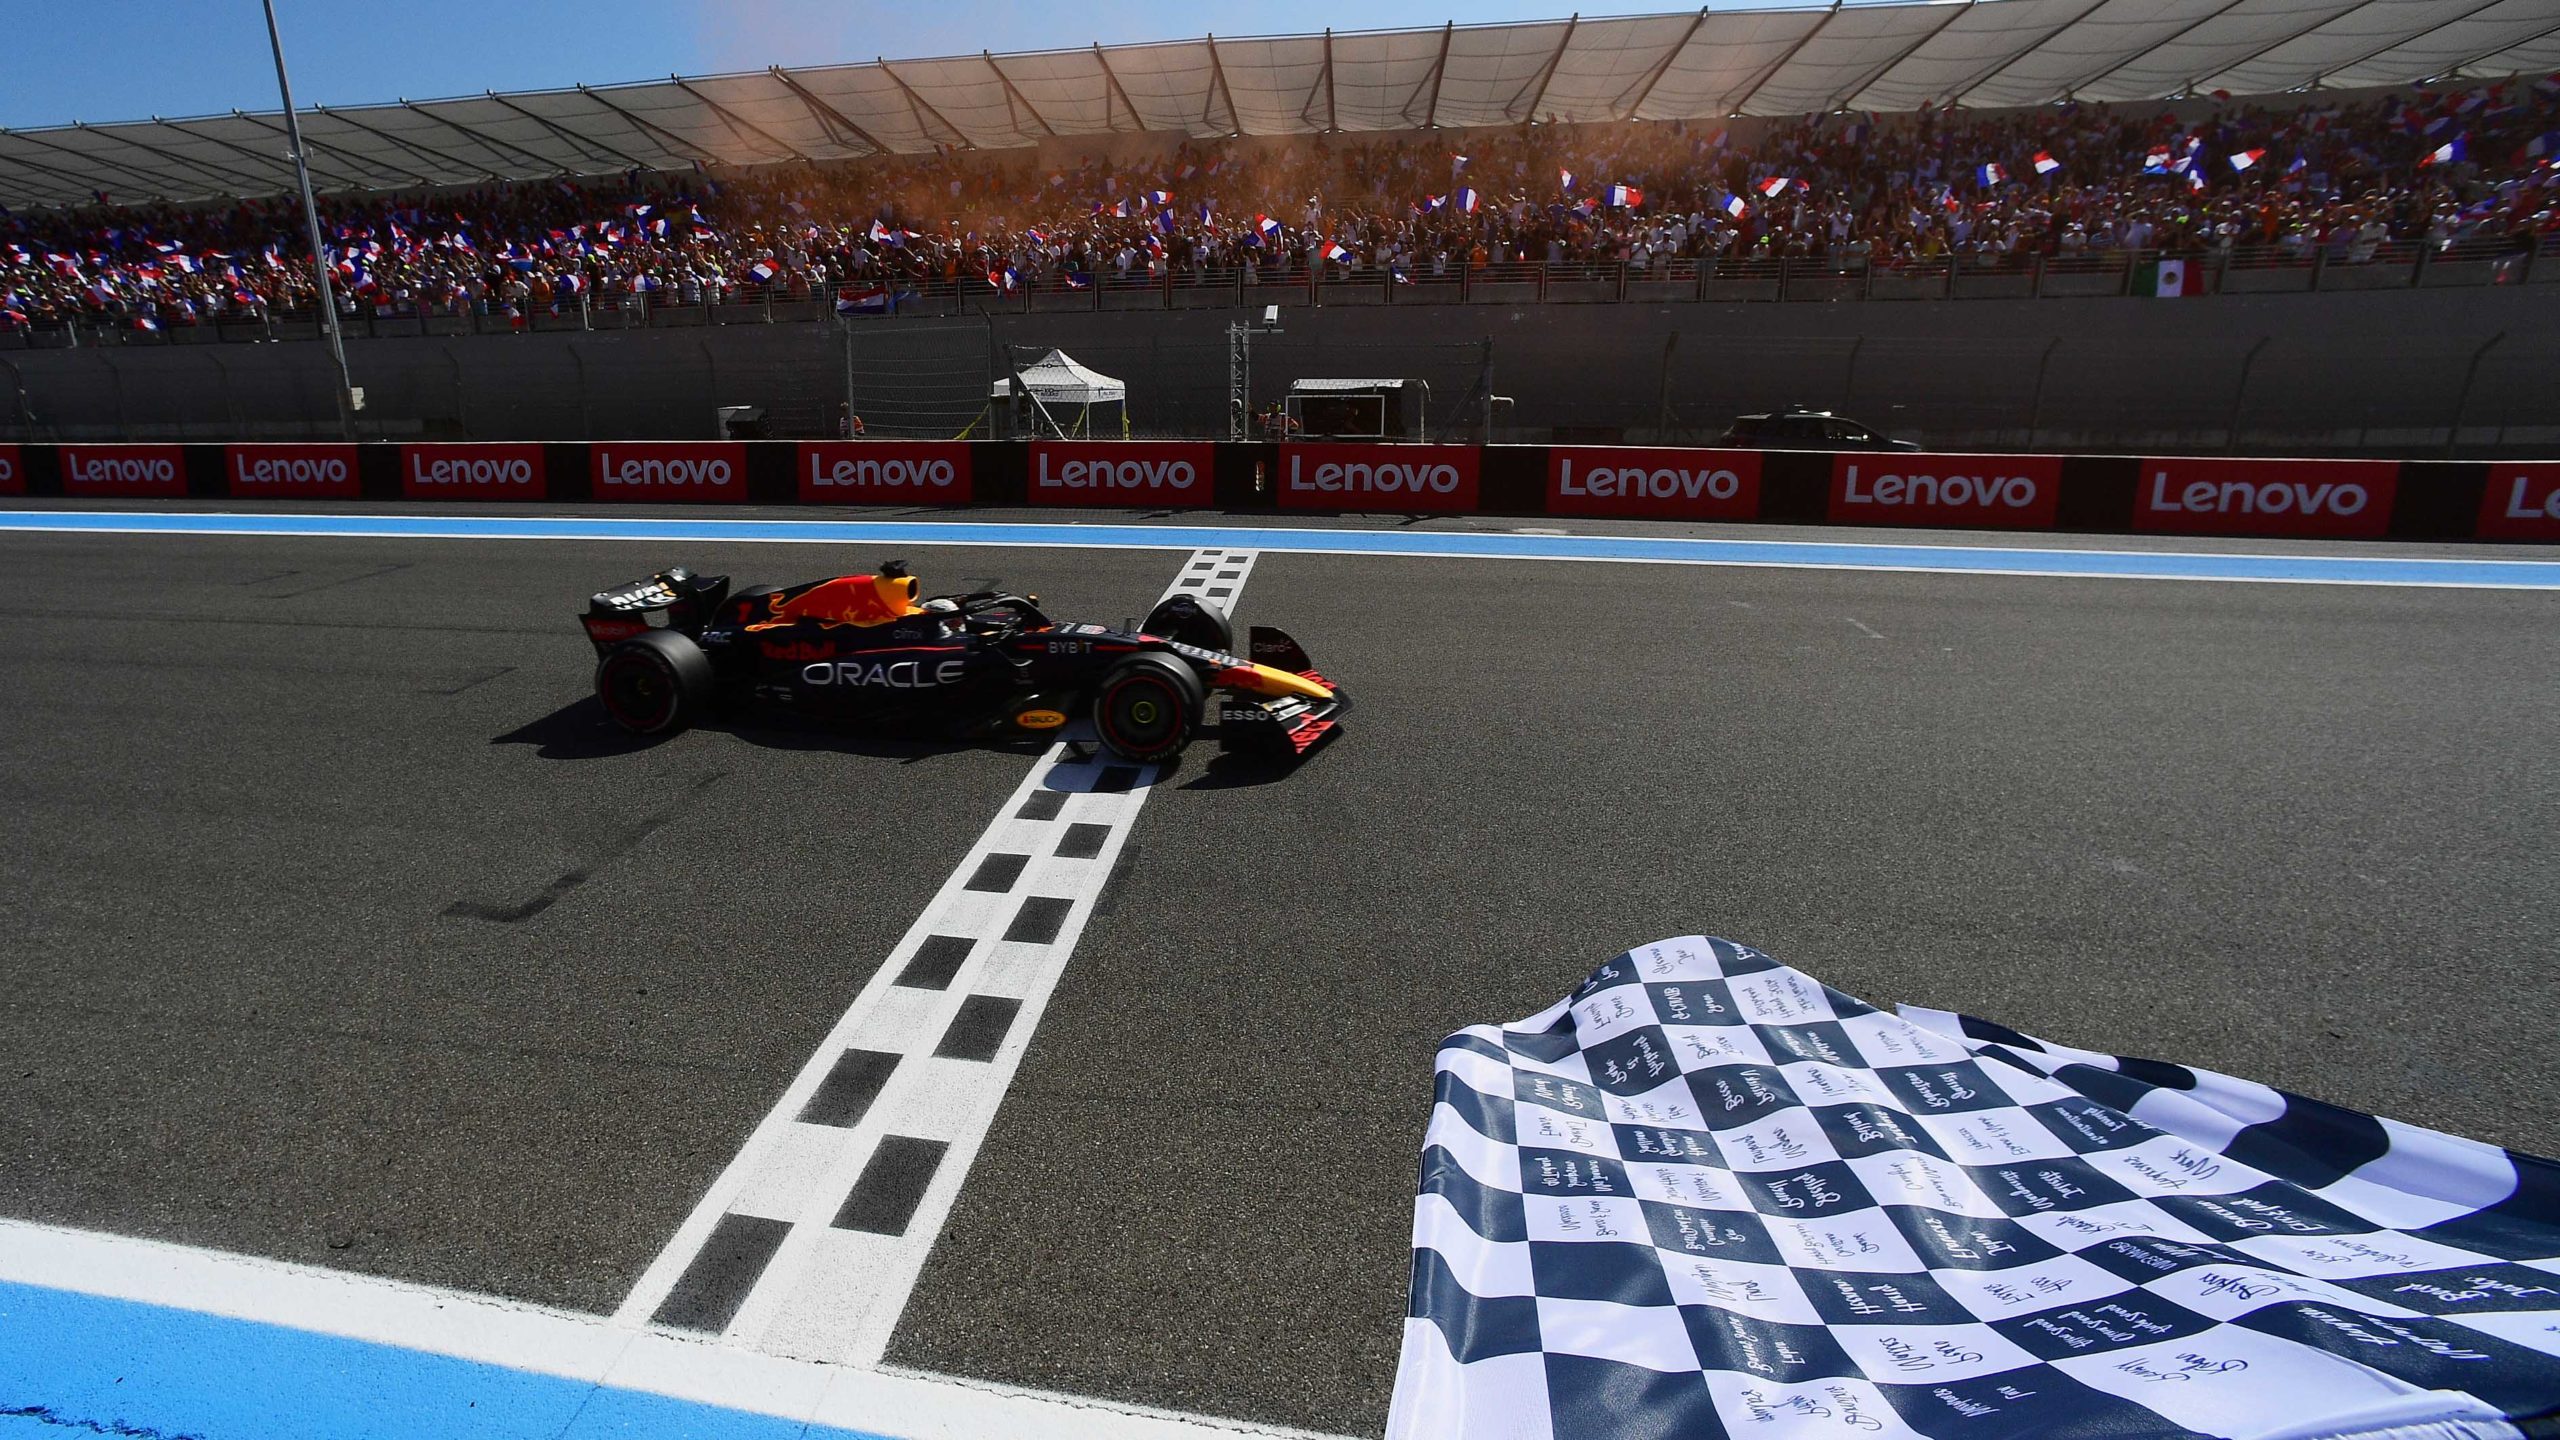 Chequered-flag-waves-as-Max-Verstappen-crosses-the-finish-line-to-win-the-2022-French-Grand-Prix